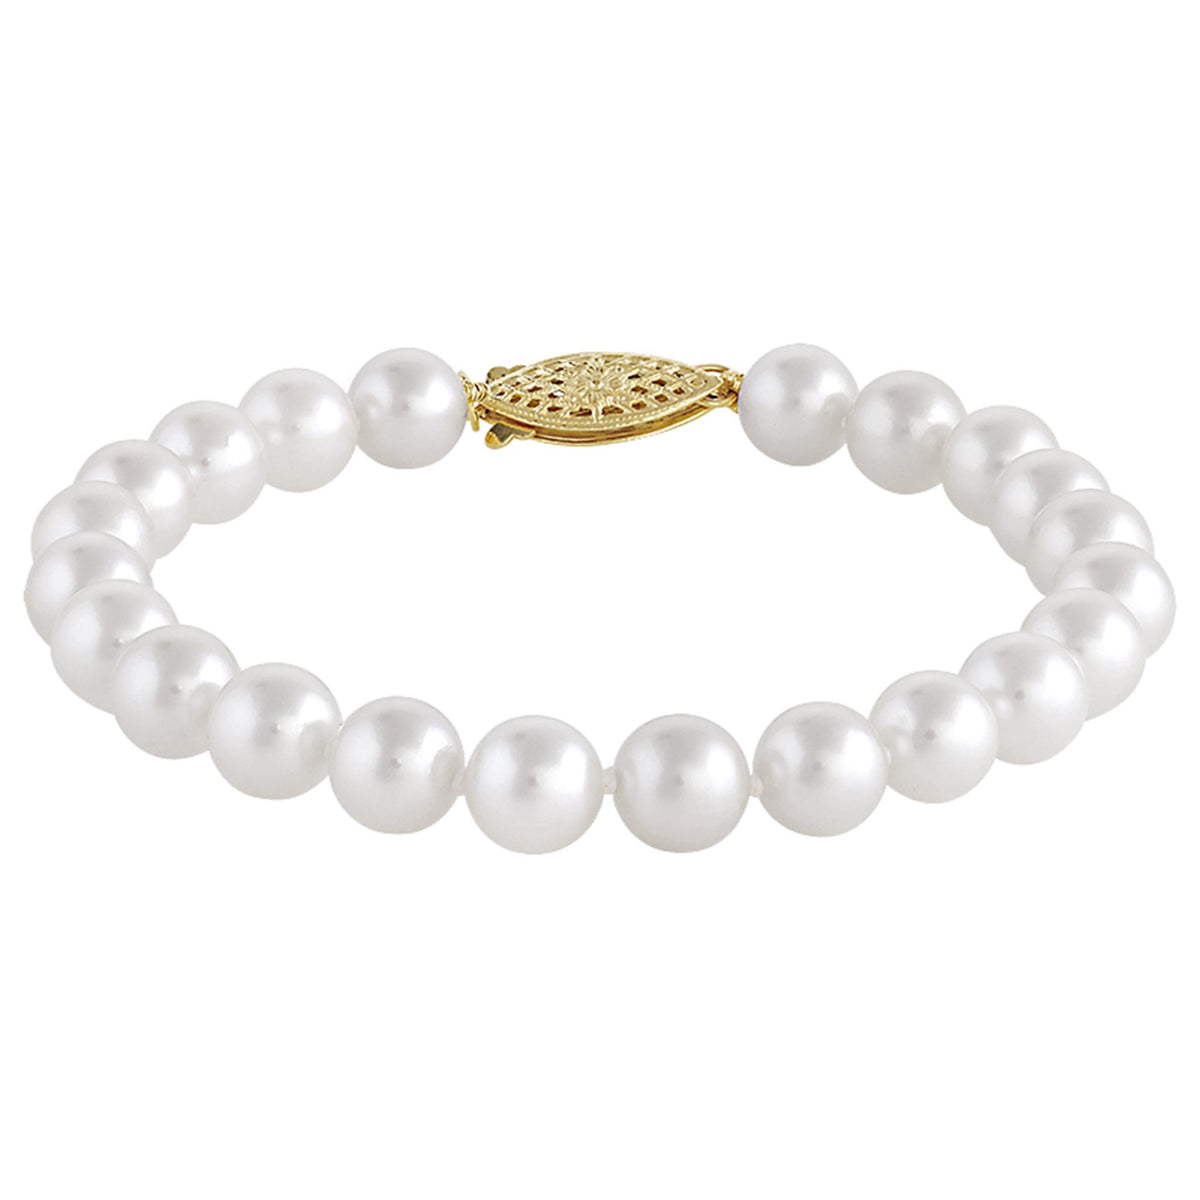 7.5" Bracelet With 7.5mm Cultured Akoya Pearl